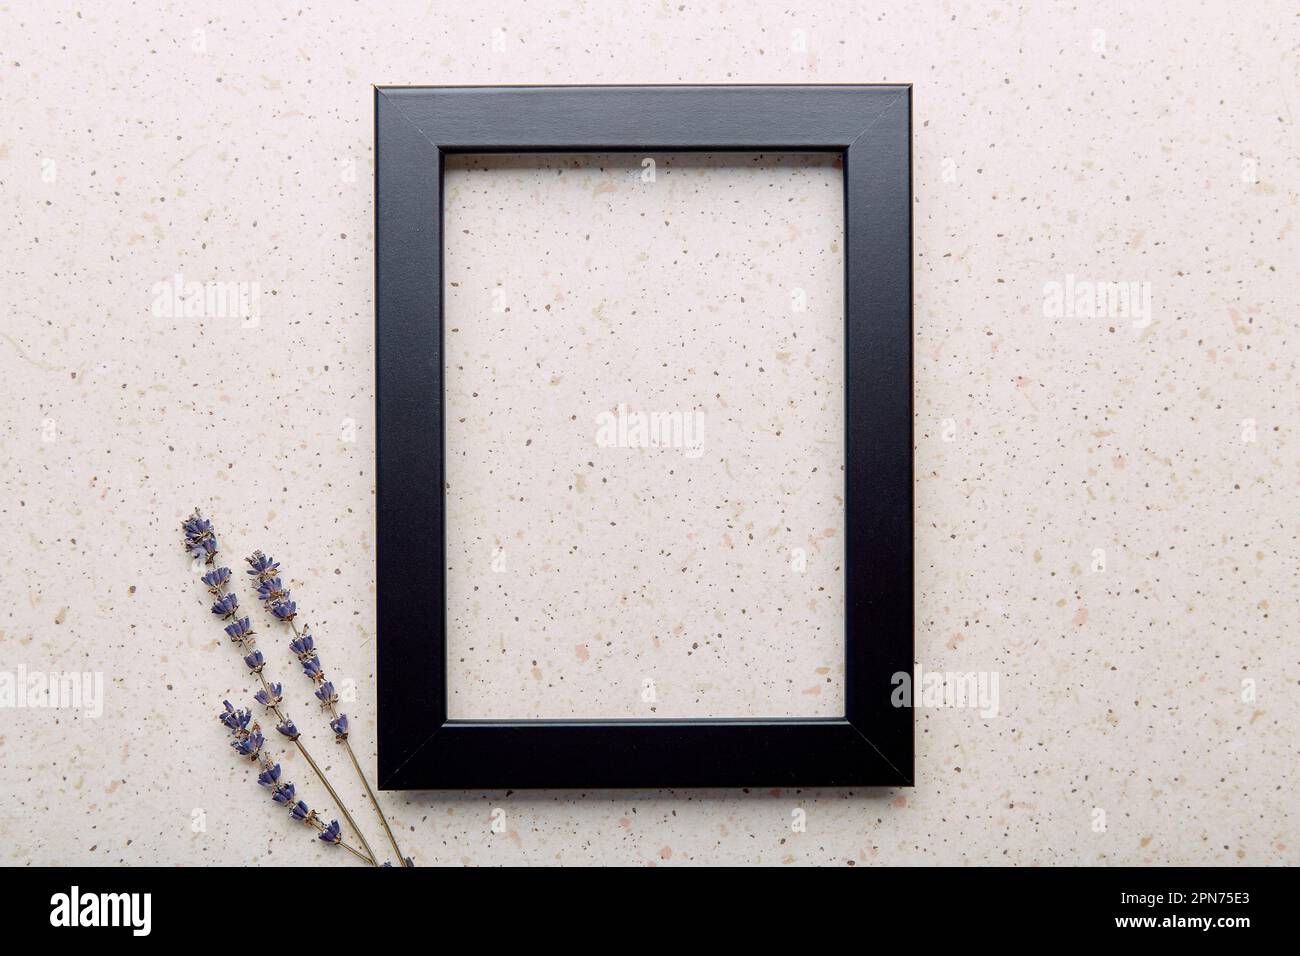 Empty interior black wall frame mockup, template with lavender. Aesthetic minimalist eco-friendly concept background. Stock Photo